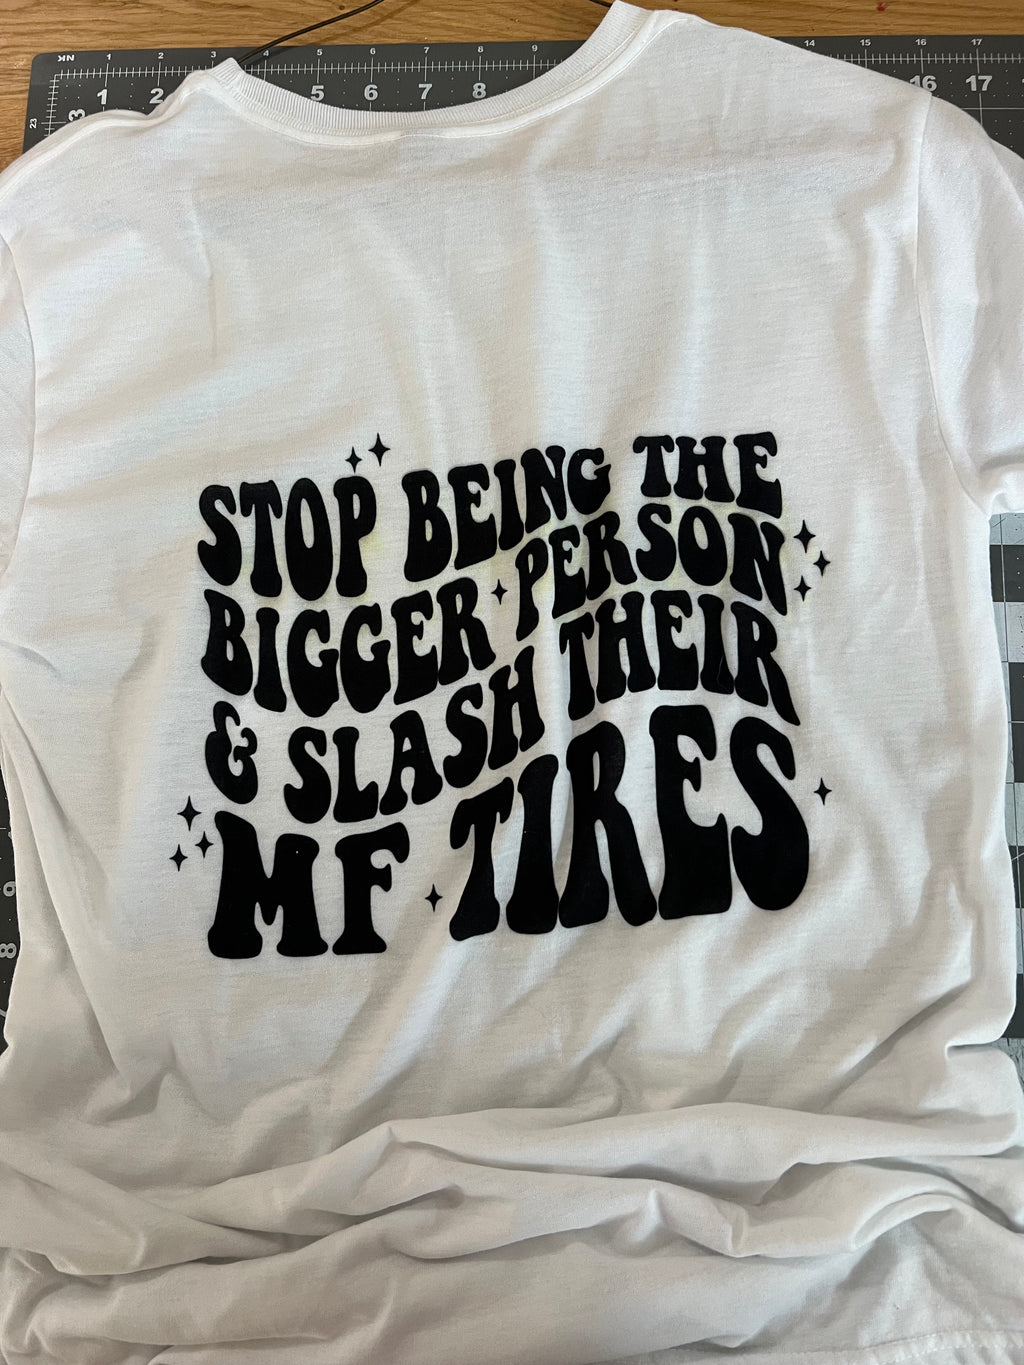 RTS Adult Medium stop being the bigger person and slash their tires white tshirt